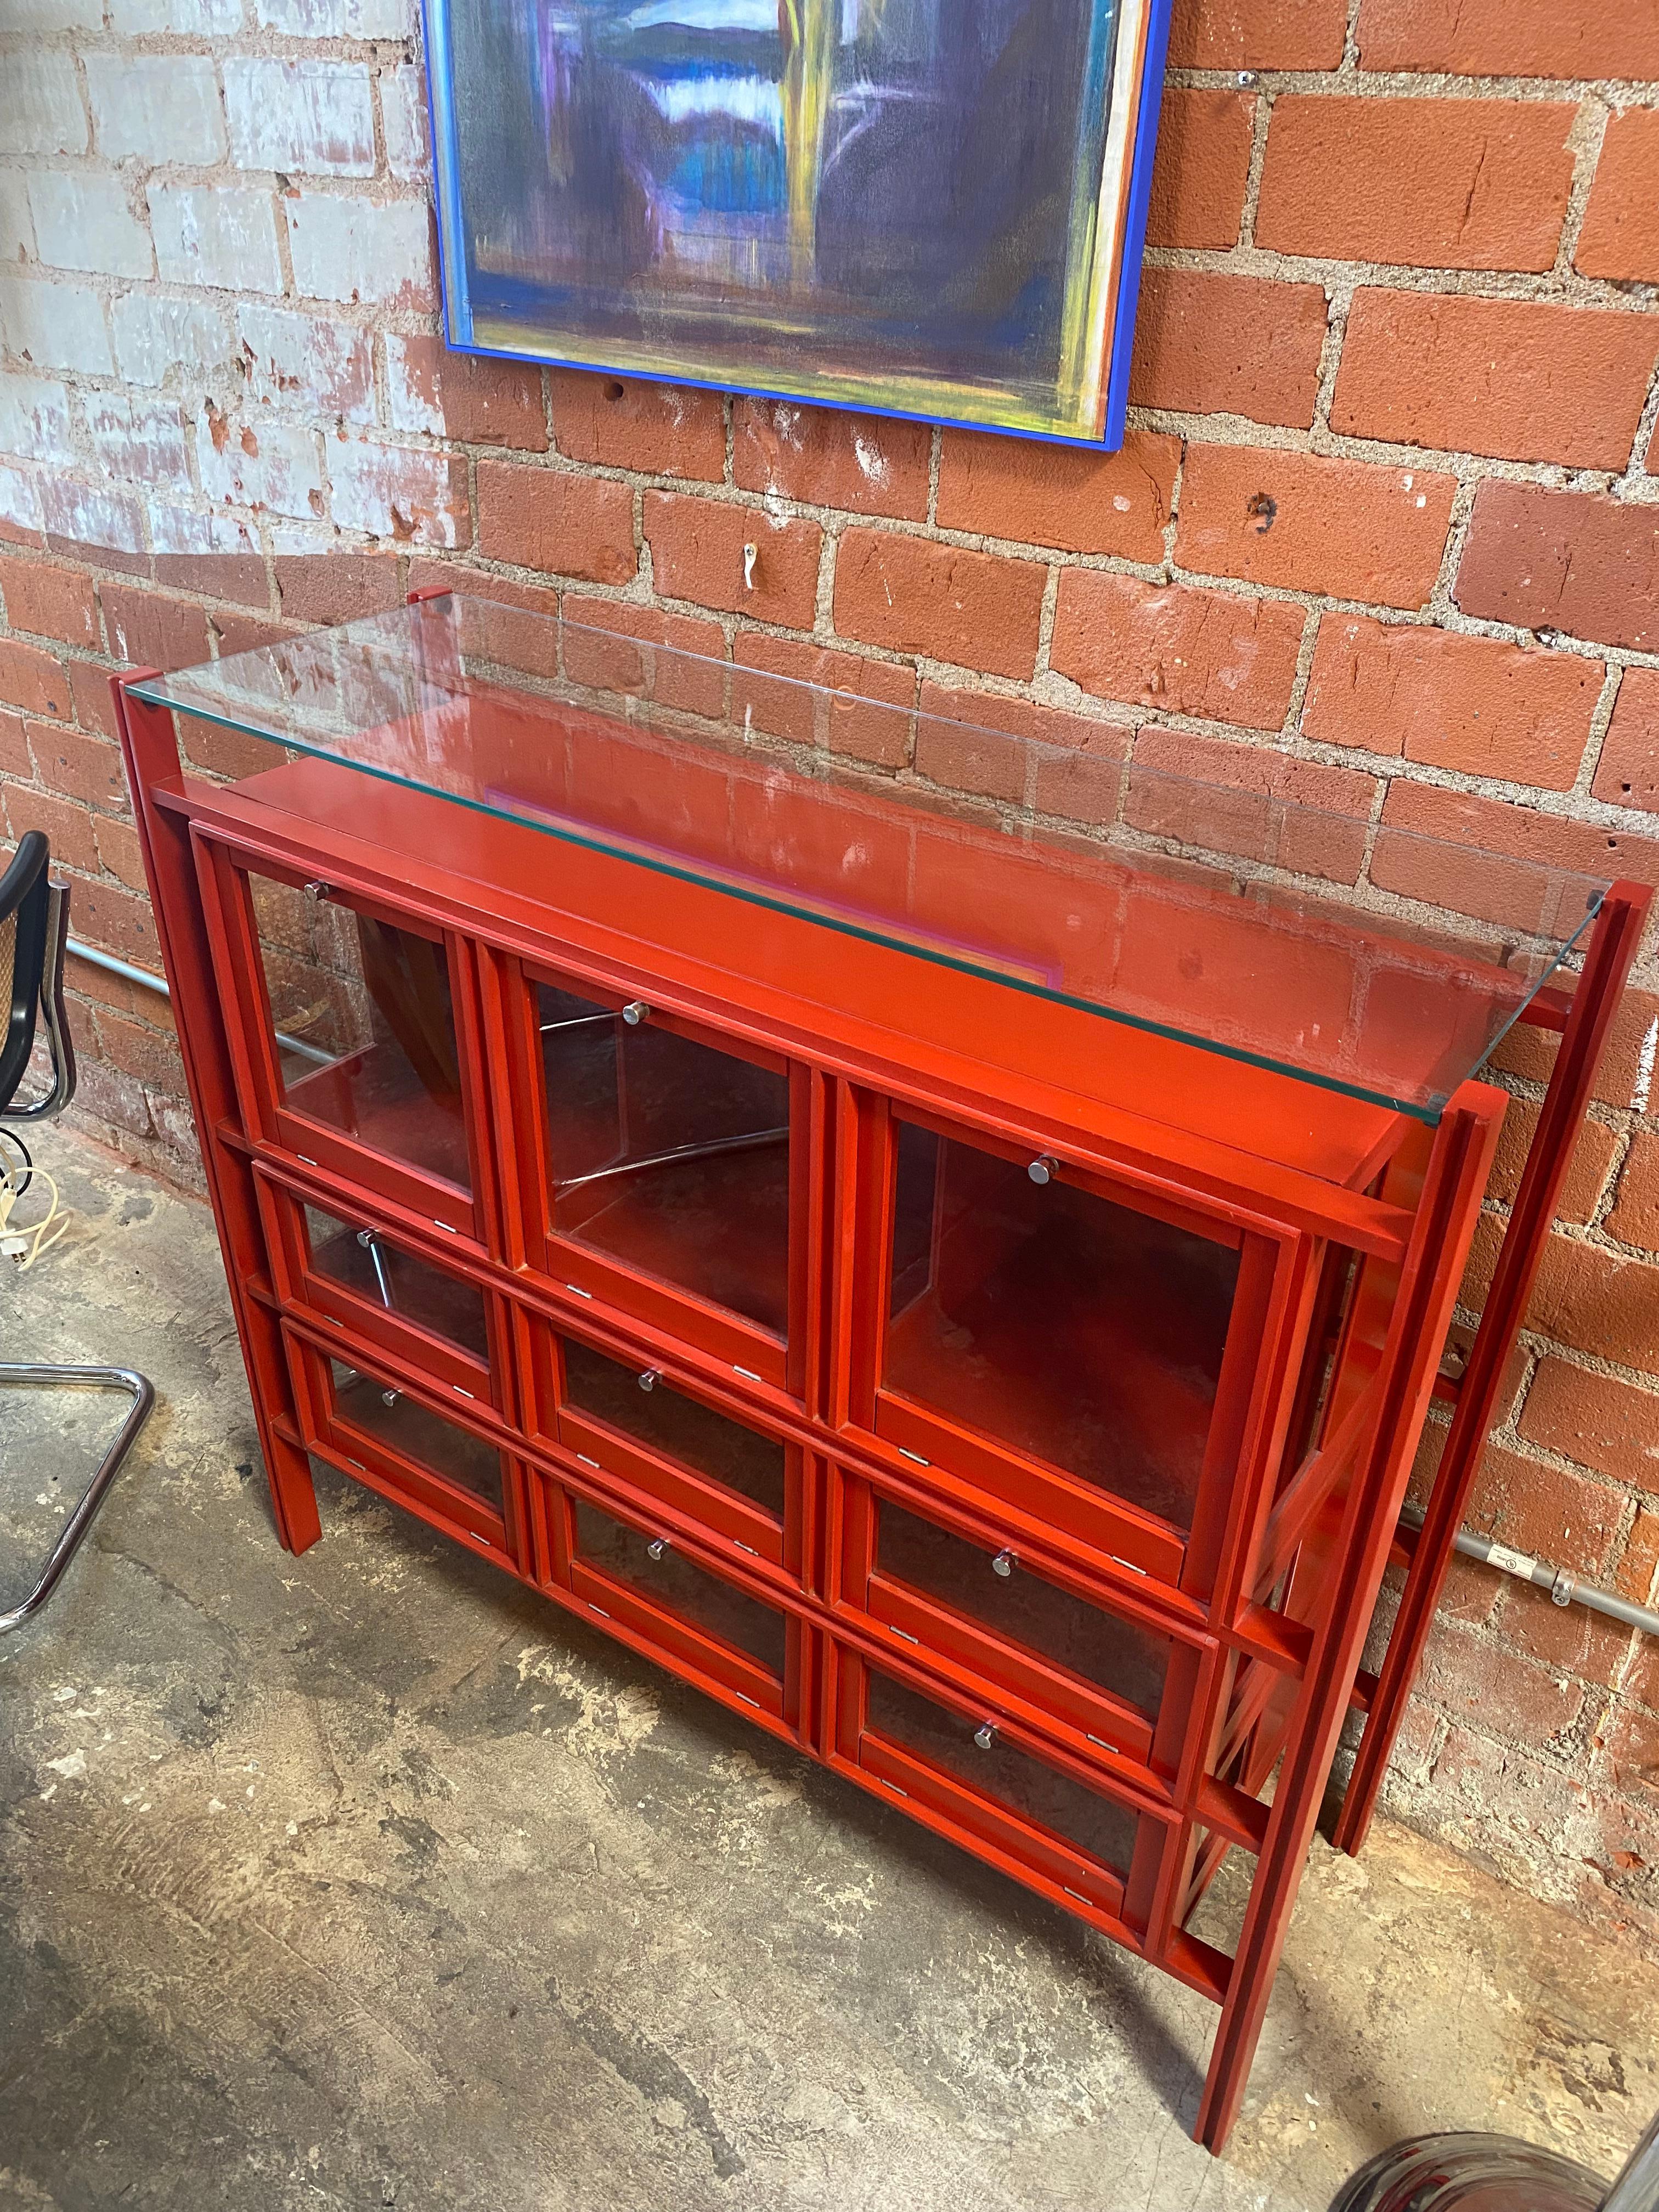 Carlo de Carli Rare Red Lacquered Wood Showcase or Credenza, Italy, 1950s In Good Condition For Sale In Los Angeles, CA